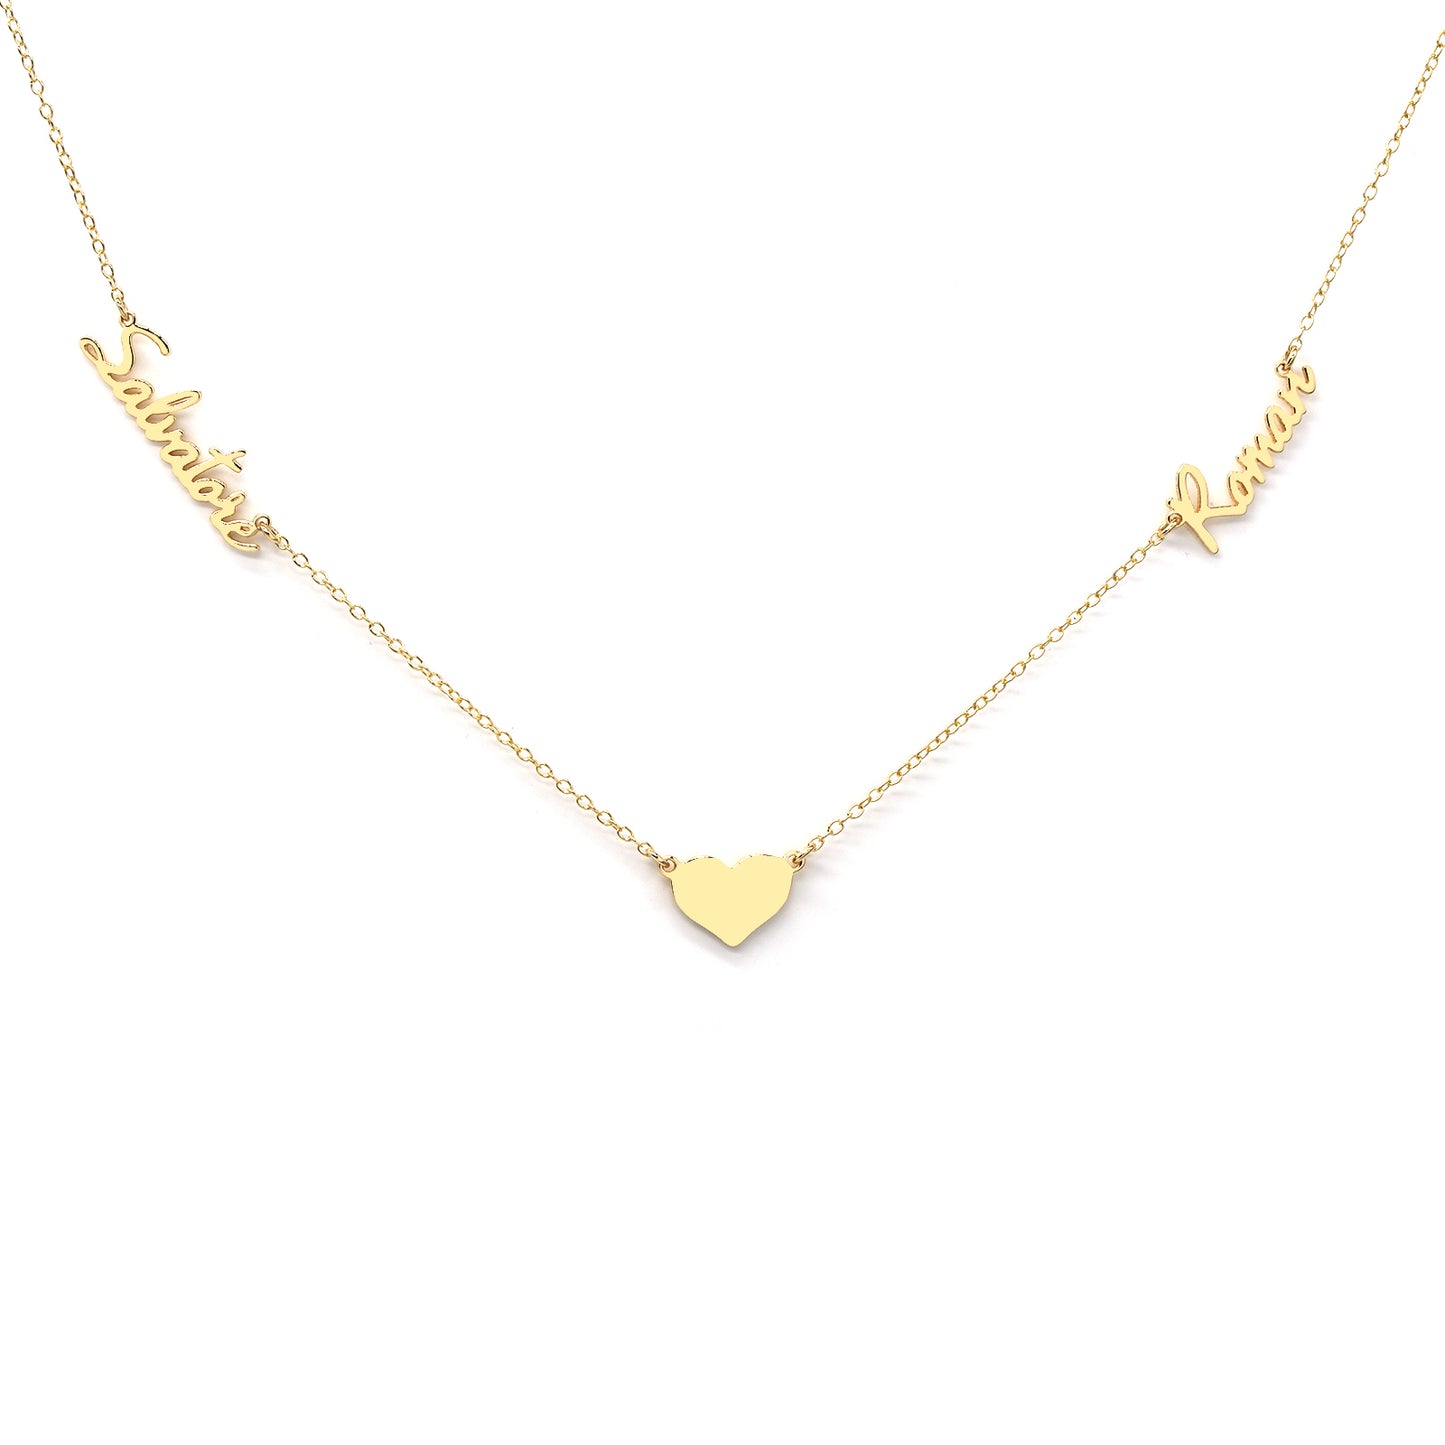 Personalized 2 Name Necklace with Heart Charm in Solid 14K Gold